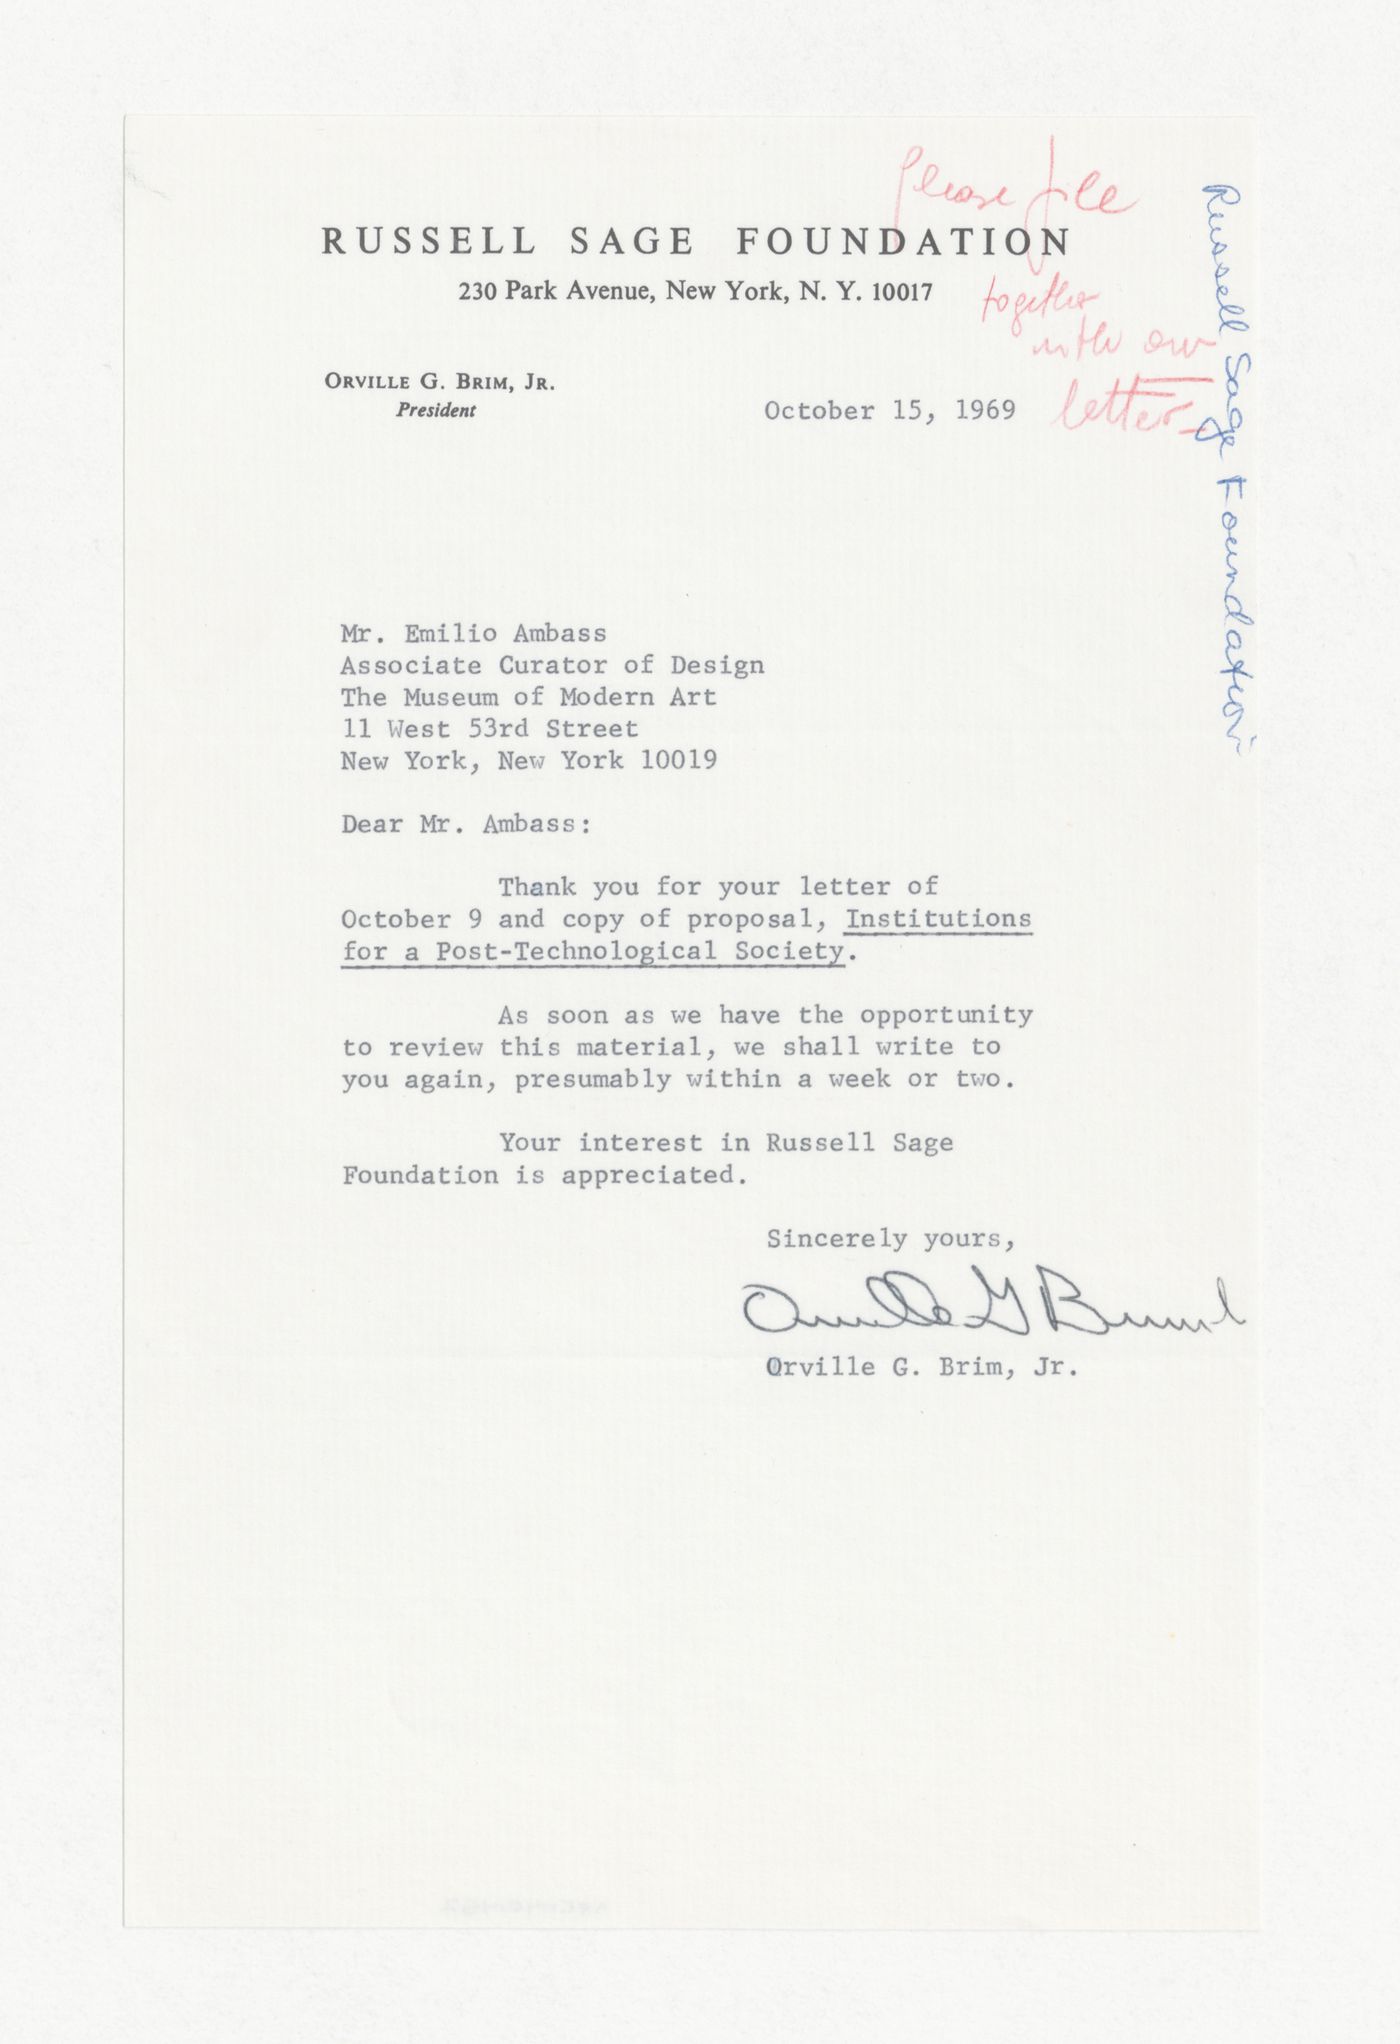 Letter from Orville G. Brin Jr. to Emilio Ambasz responding to proposal for Institutions for a Post-Technological Society conference